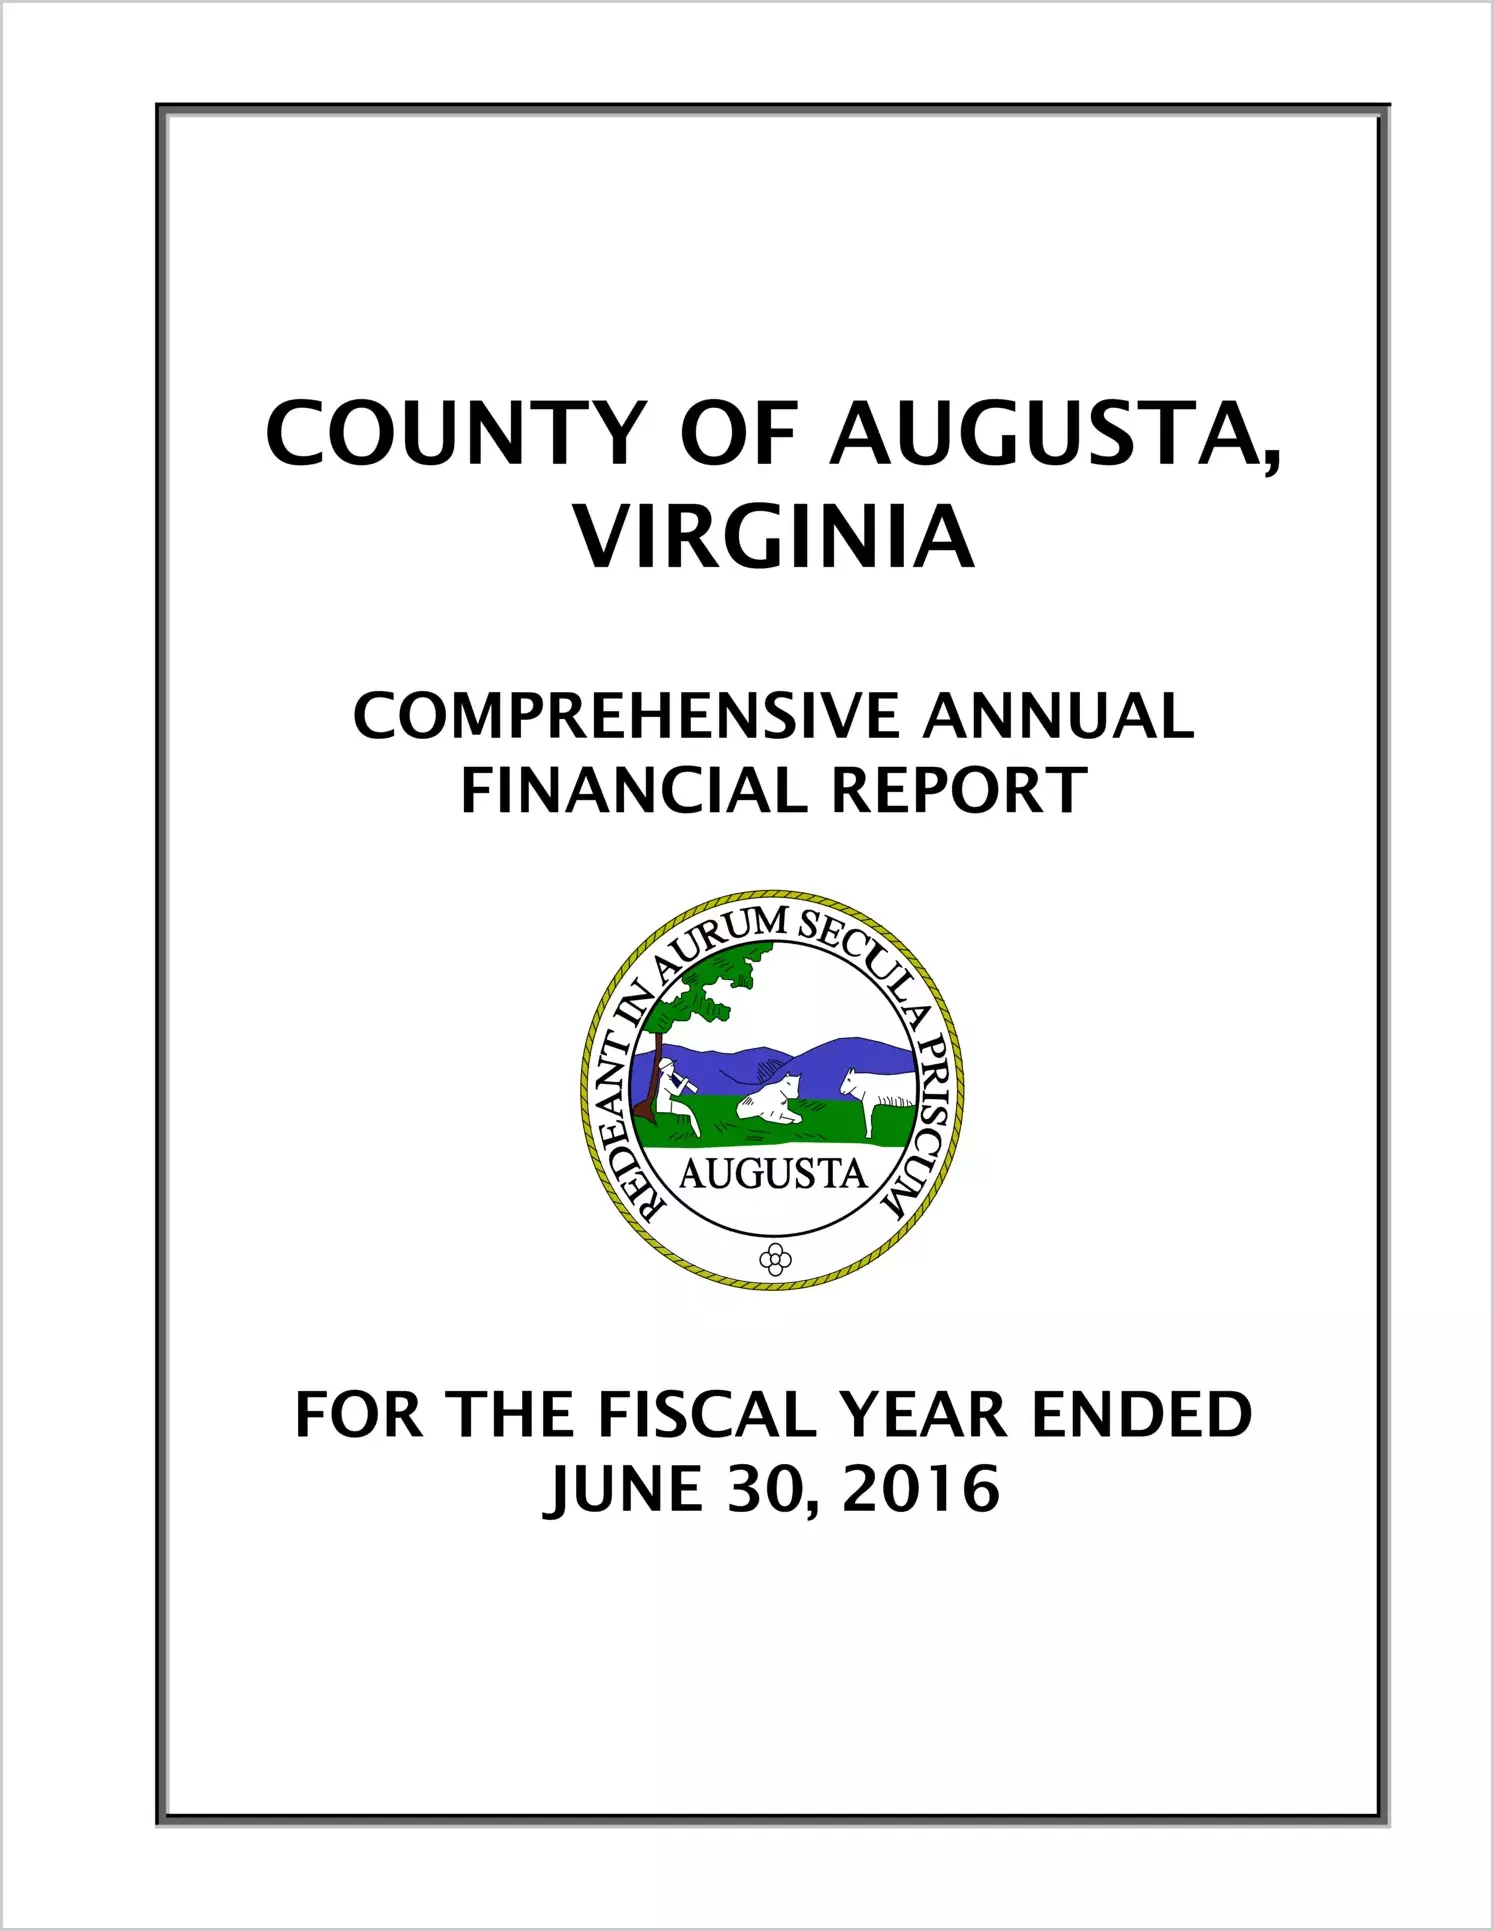 2016 Annual Financial Report for County of Augusta